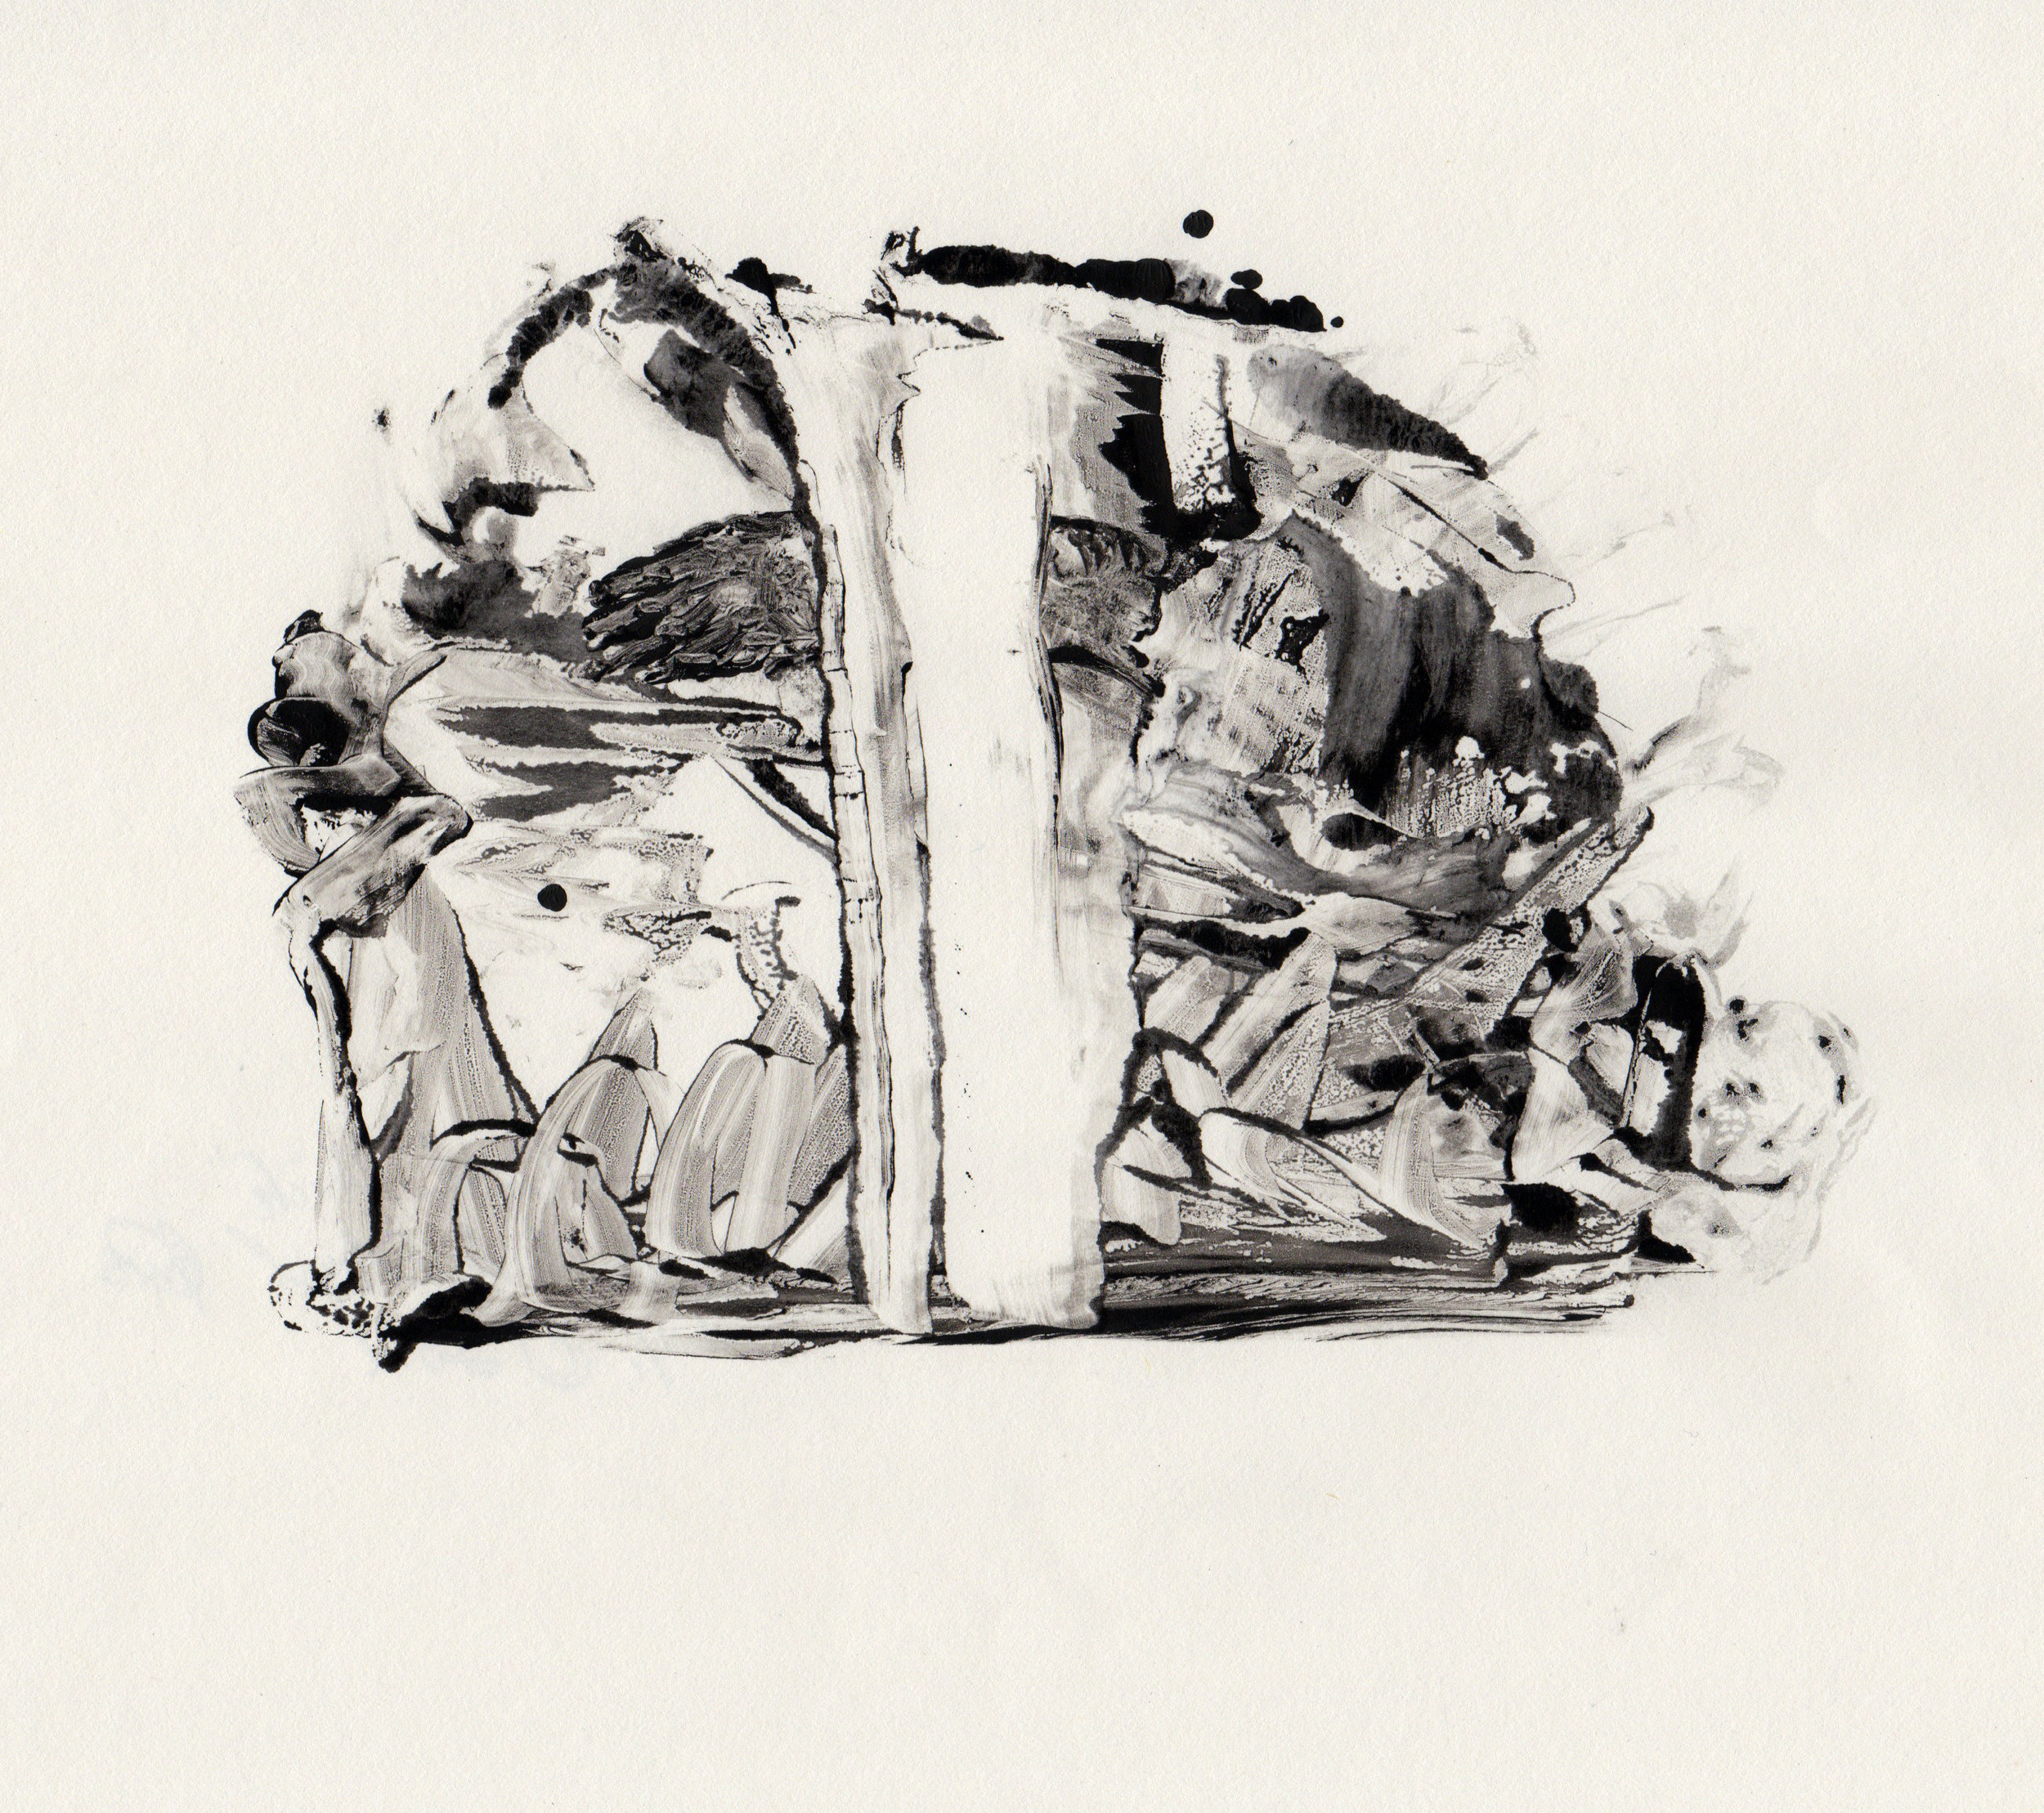 In The Thick, 2014, gelatin monotype, 10x9 inches